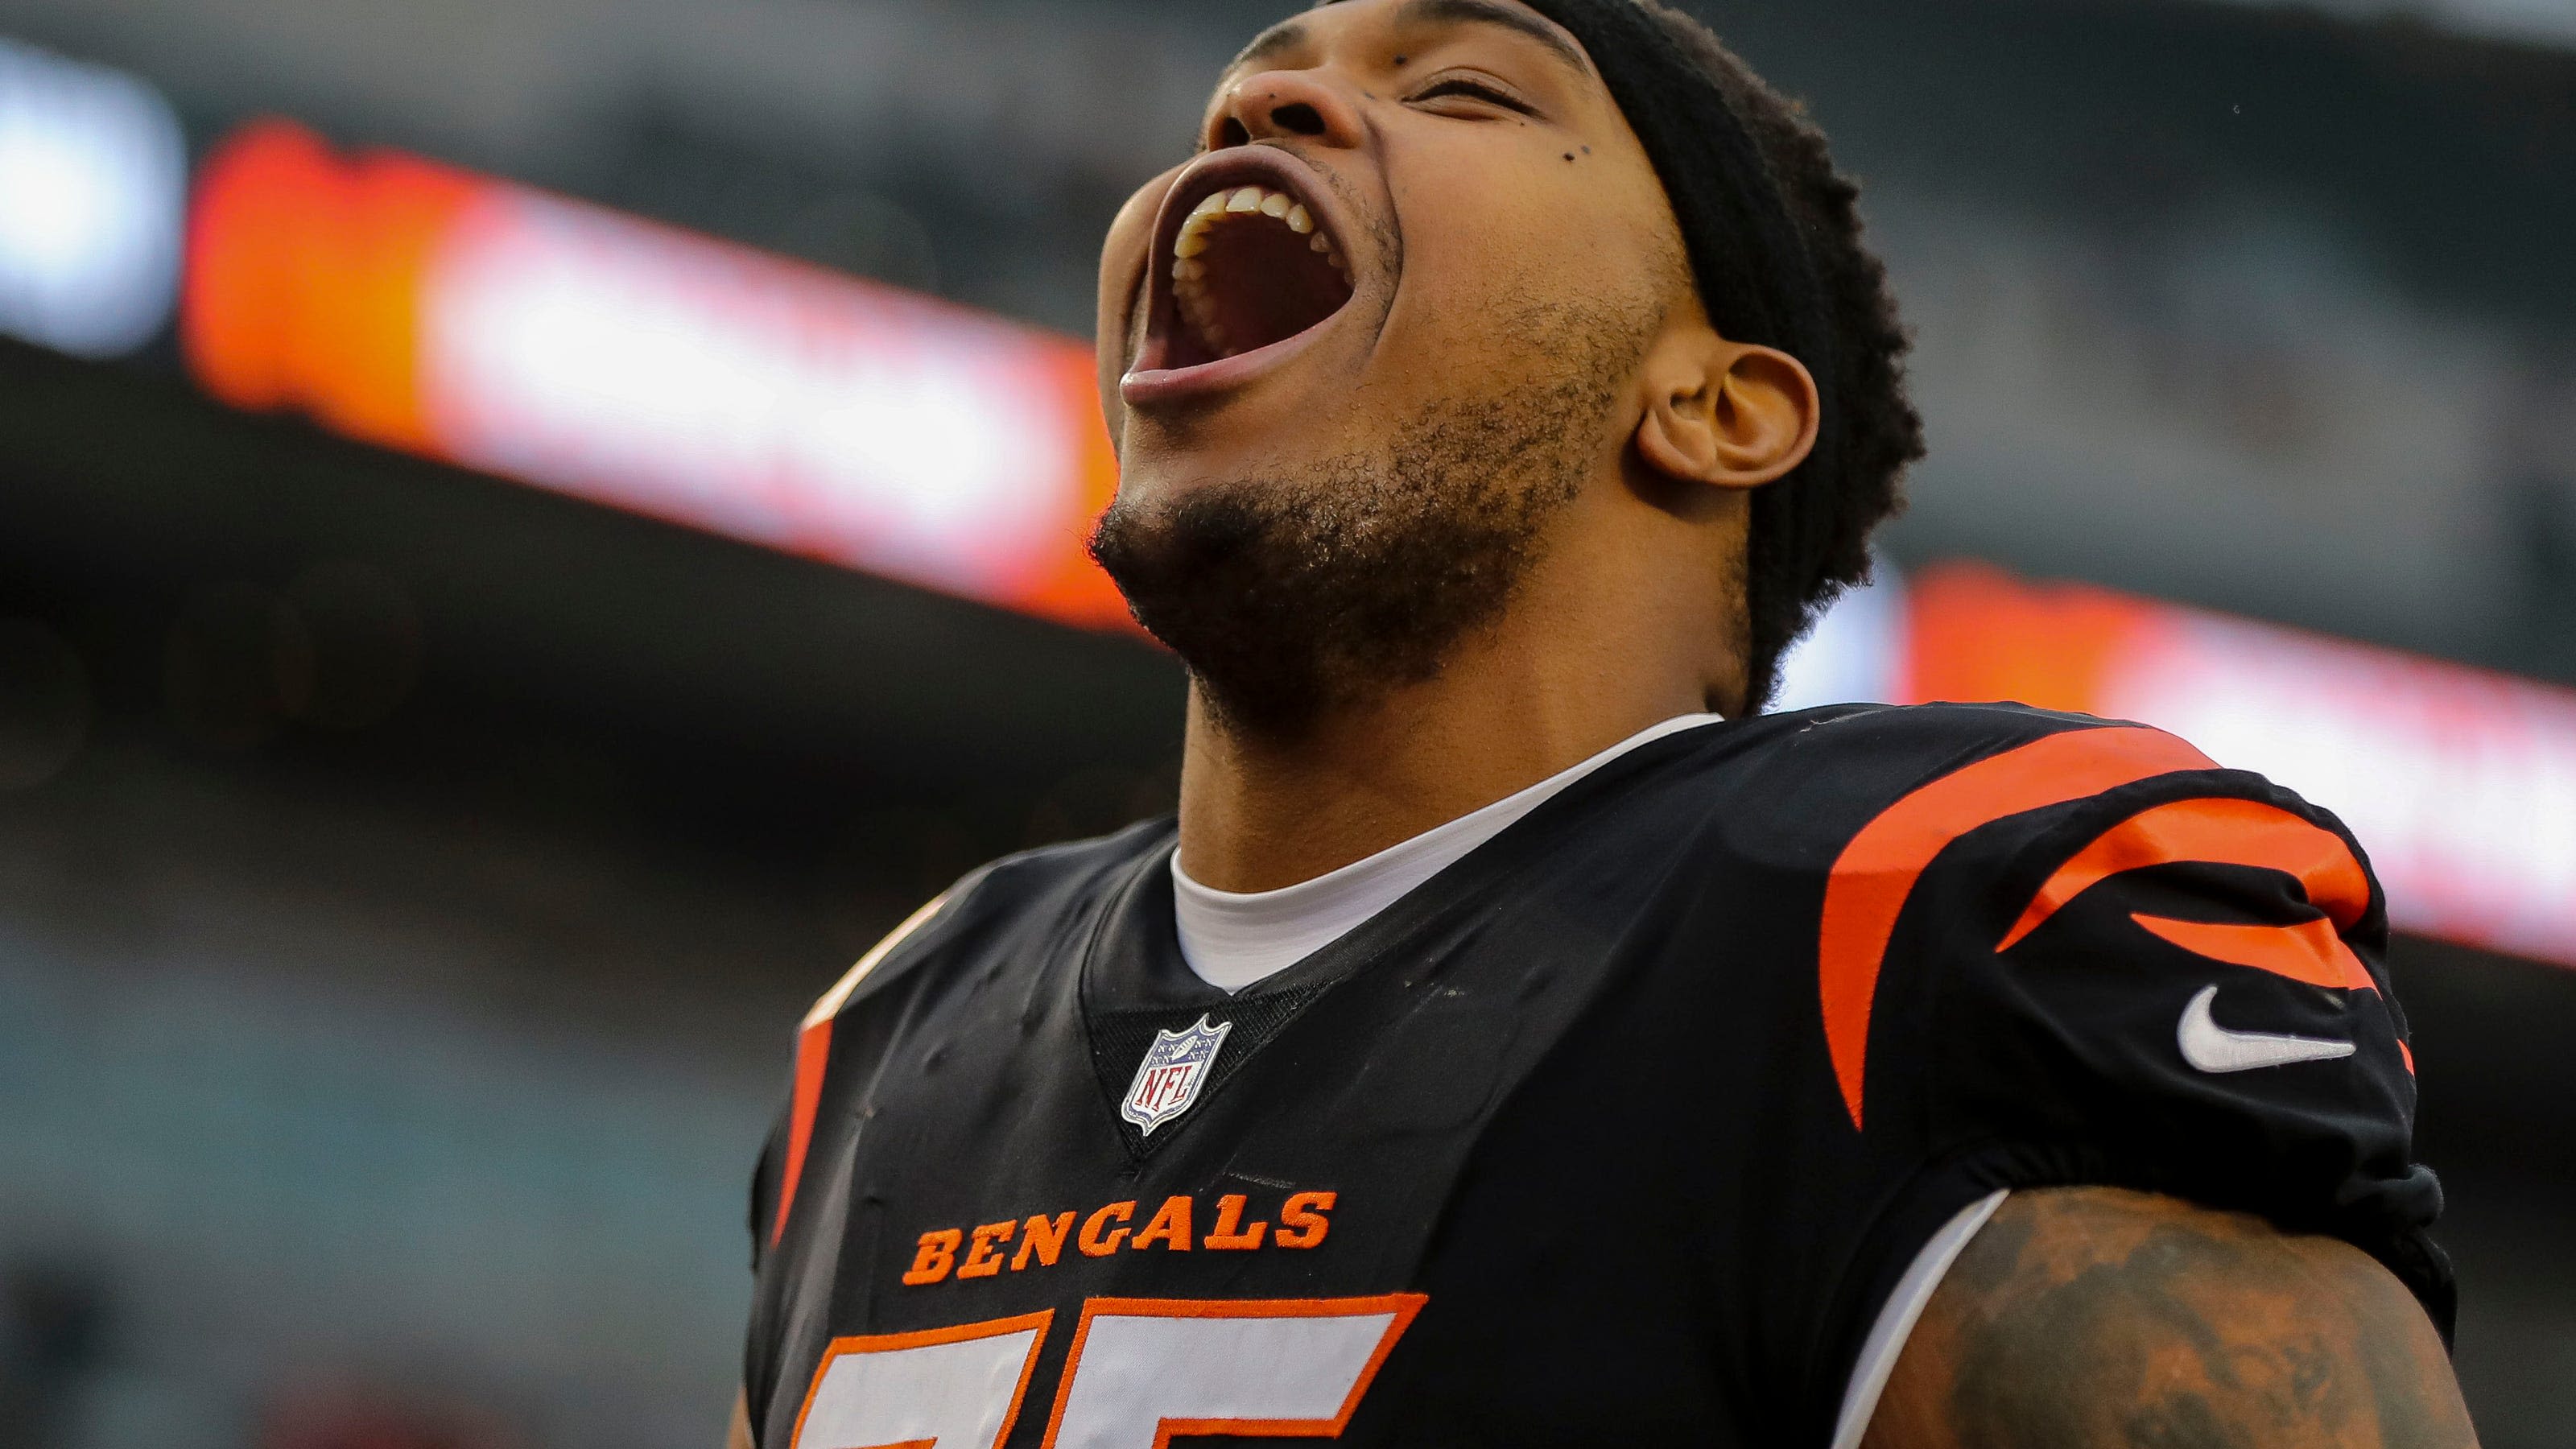 Bengals star named most overrated player at his position